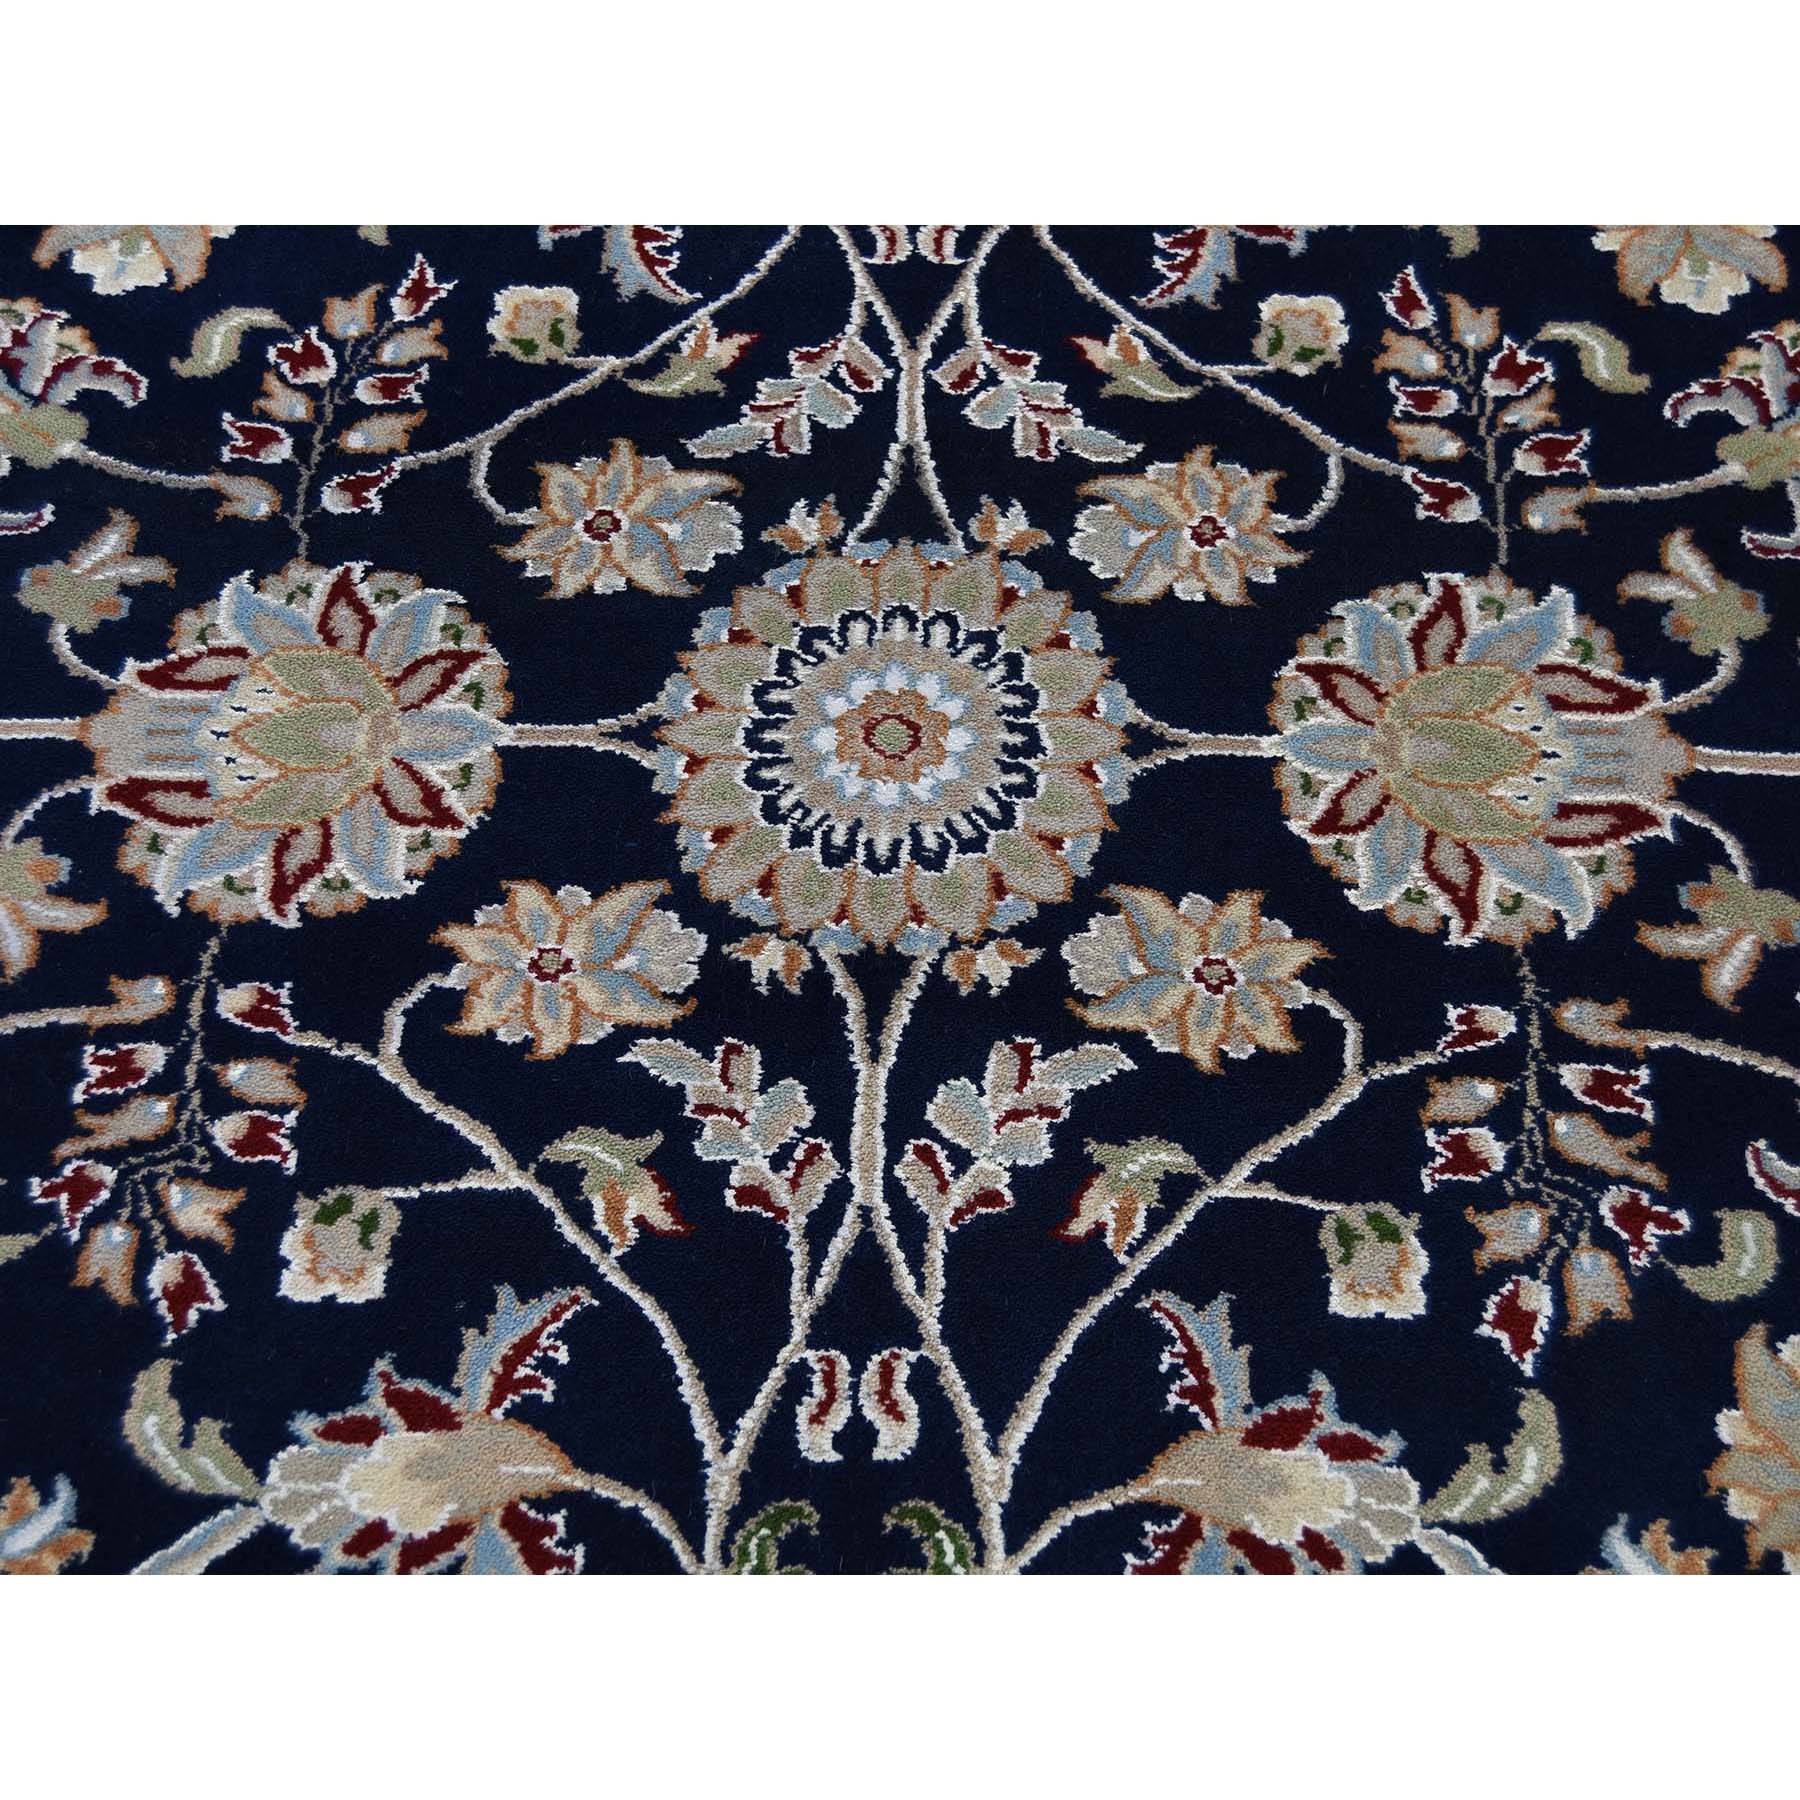 8-1 x10-1  Navy Blue Rectangle Nain Wool And Silk All Over Design 250 KPSI Hand Knotted Oriental Rug 